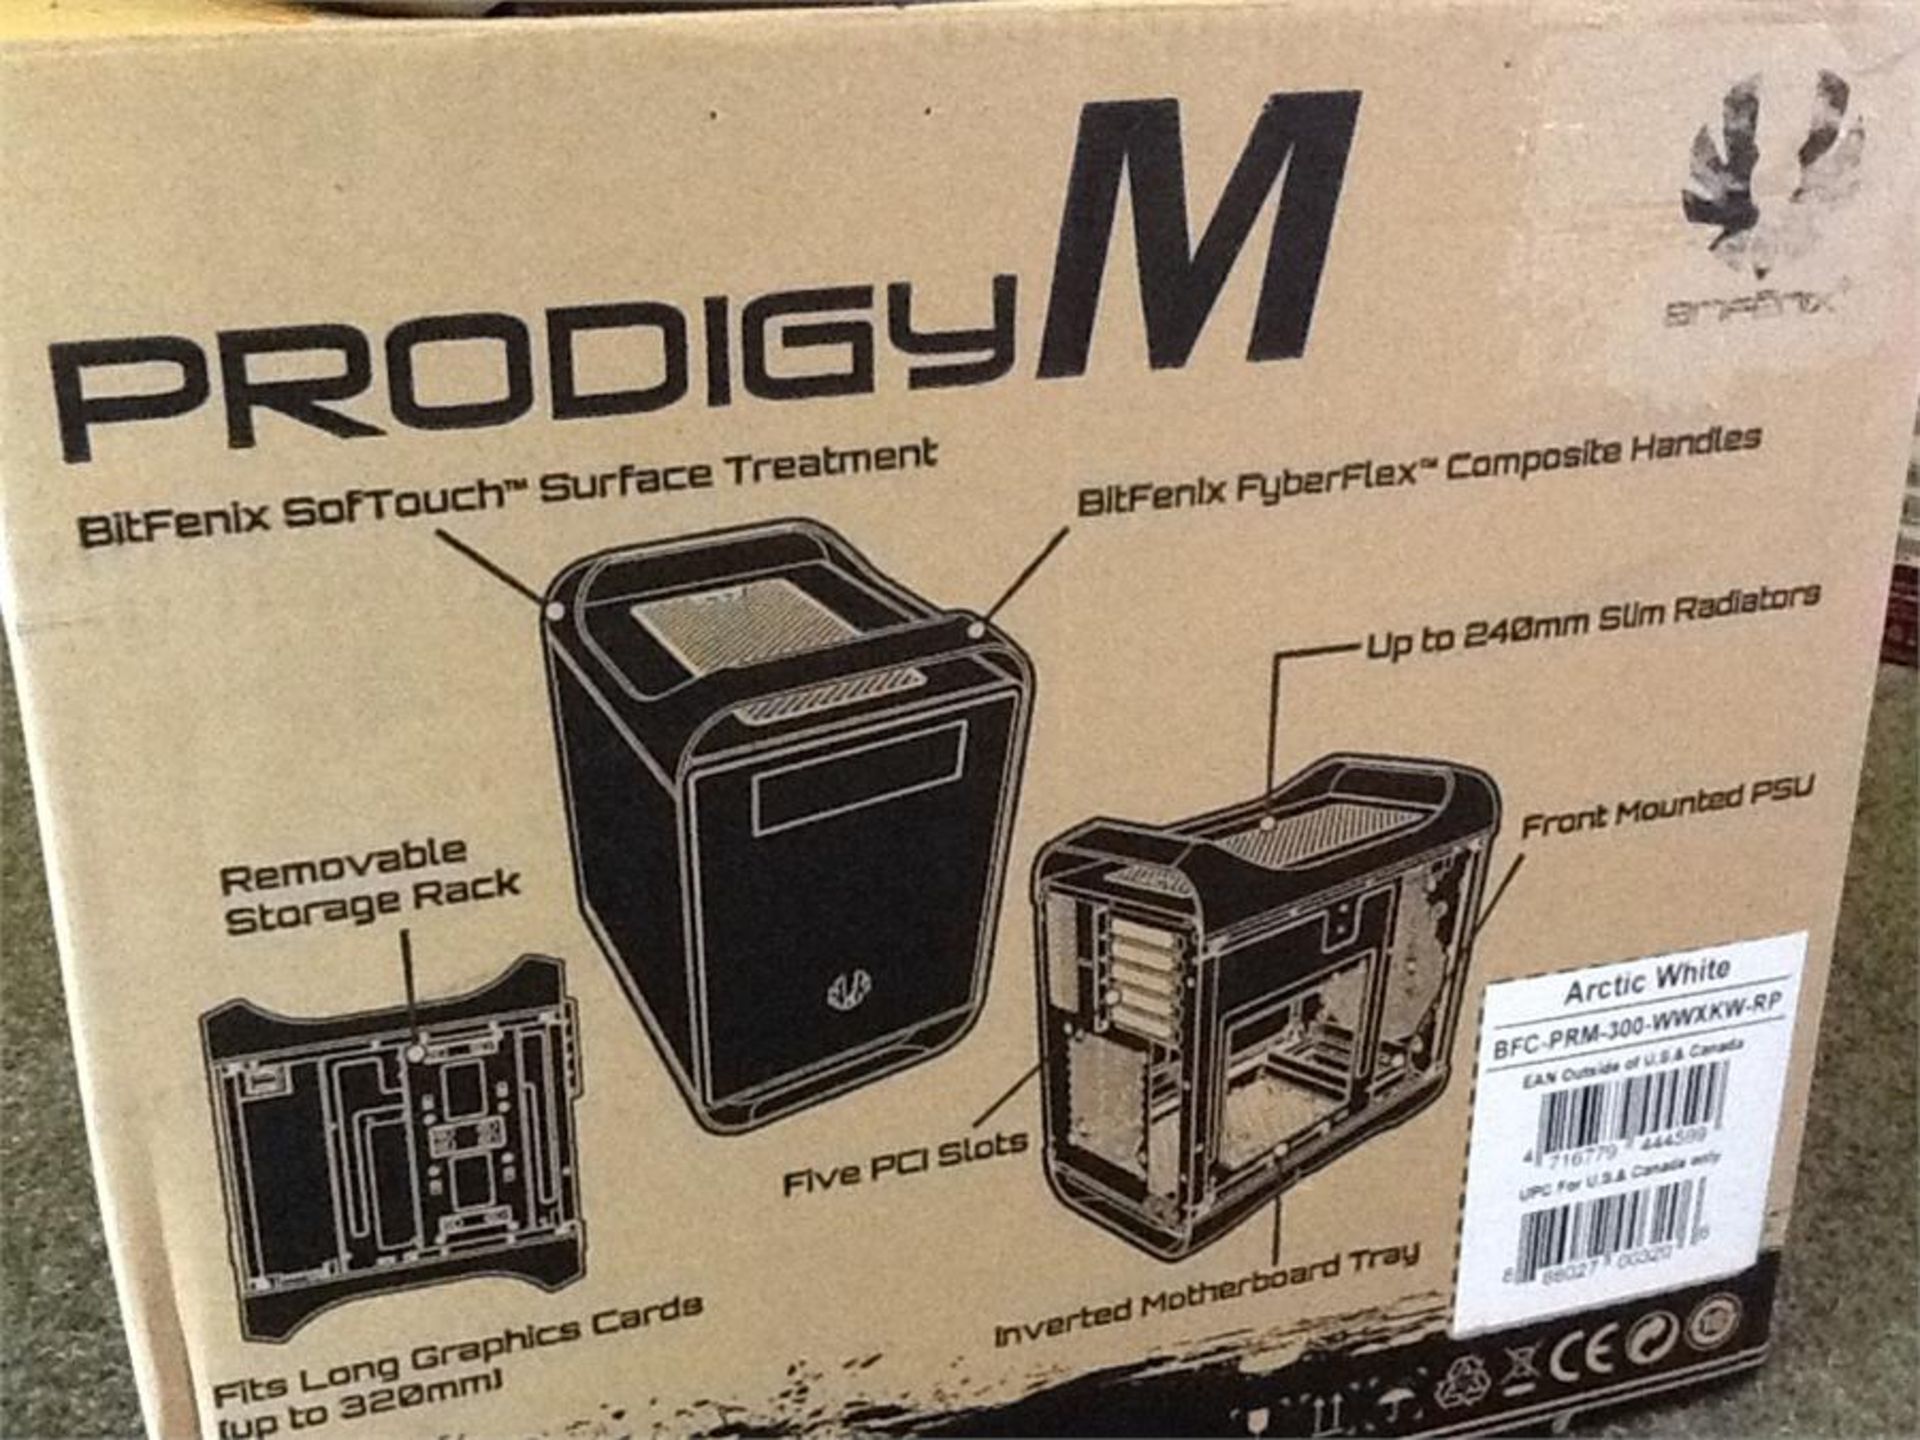 Prodigy M computer case, boxed - Image 10 of 10